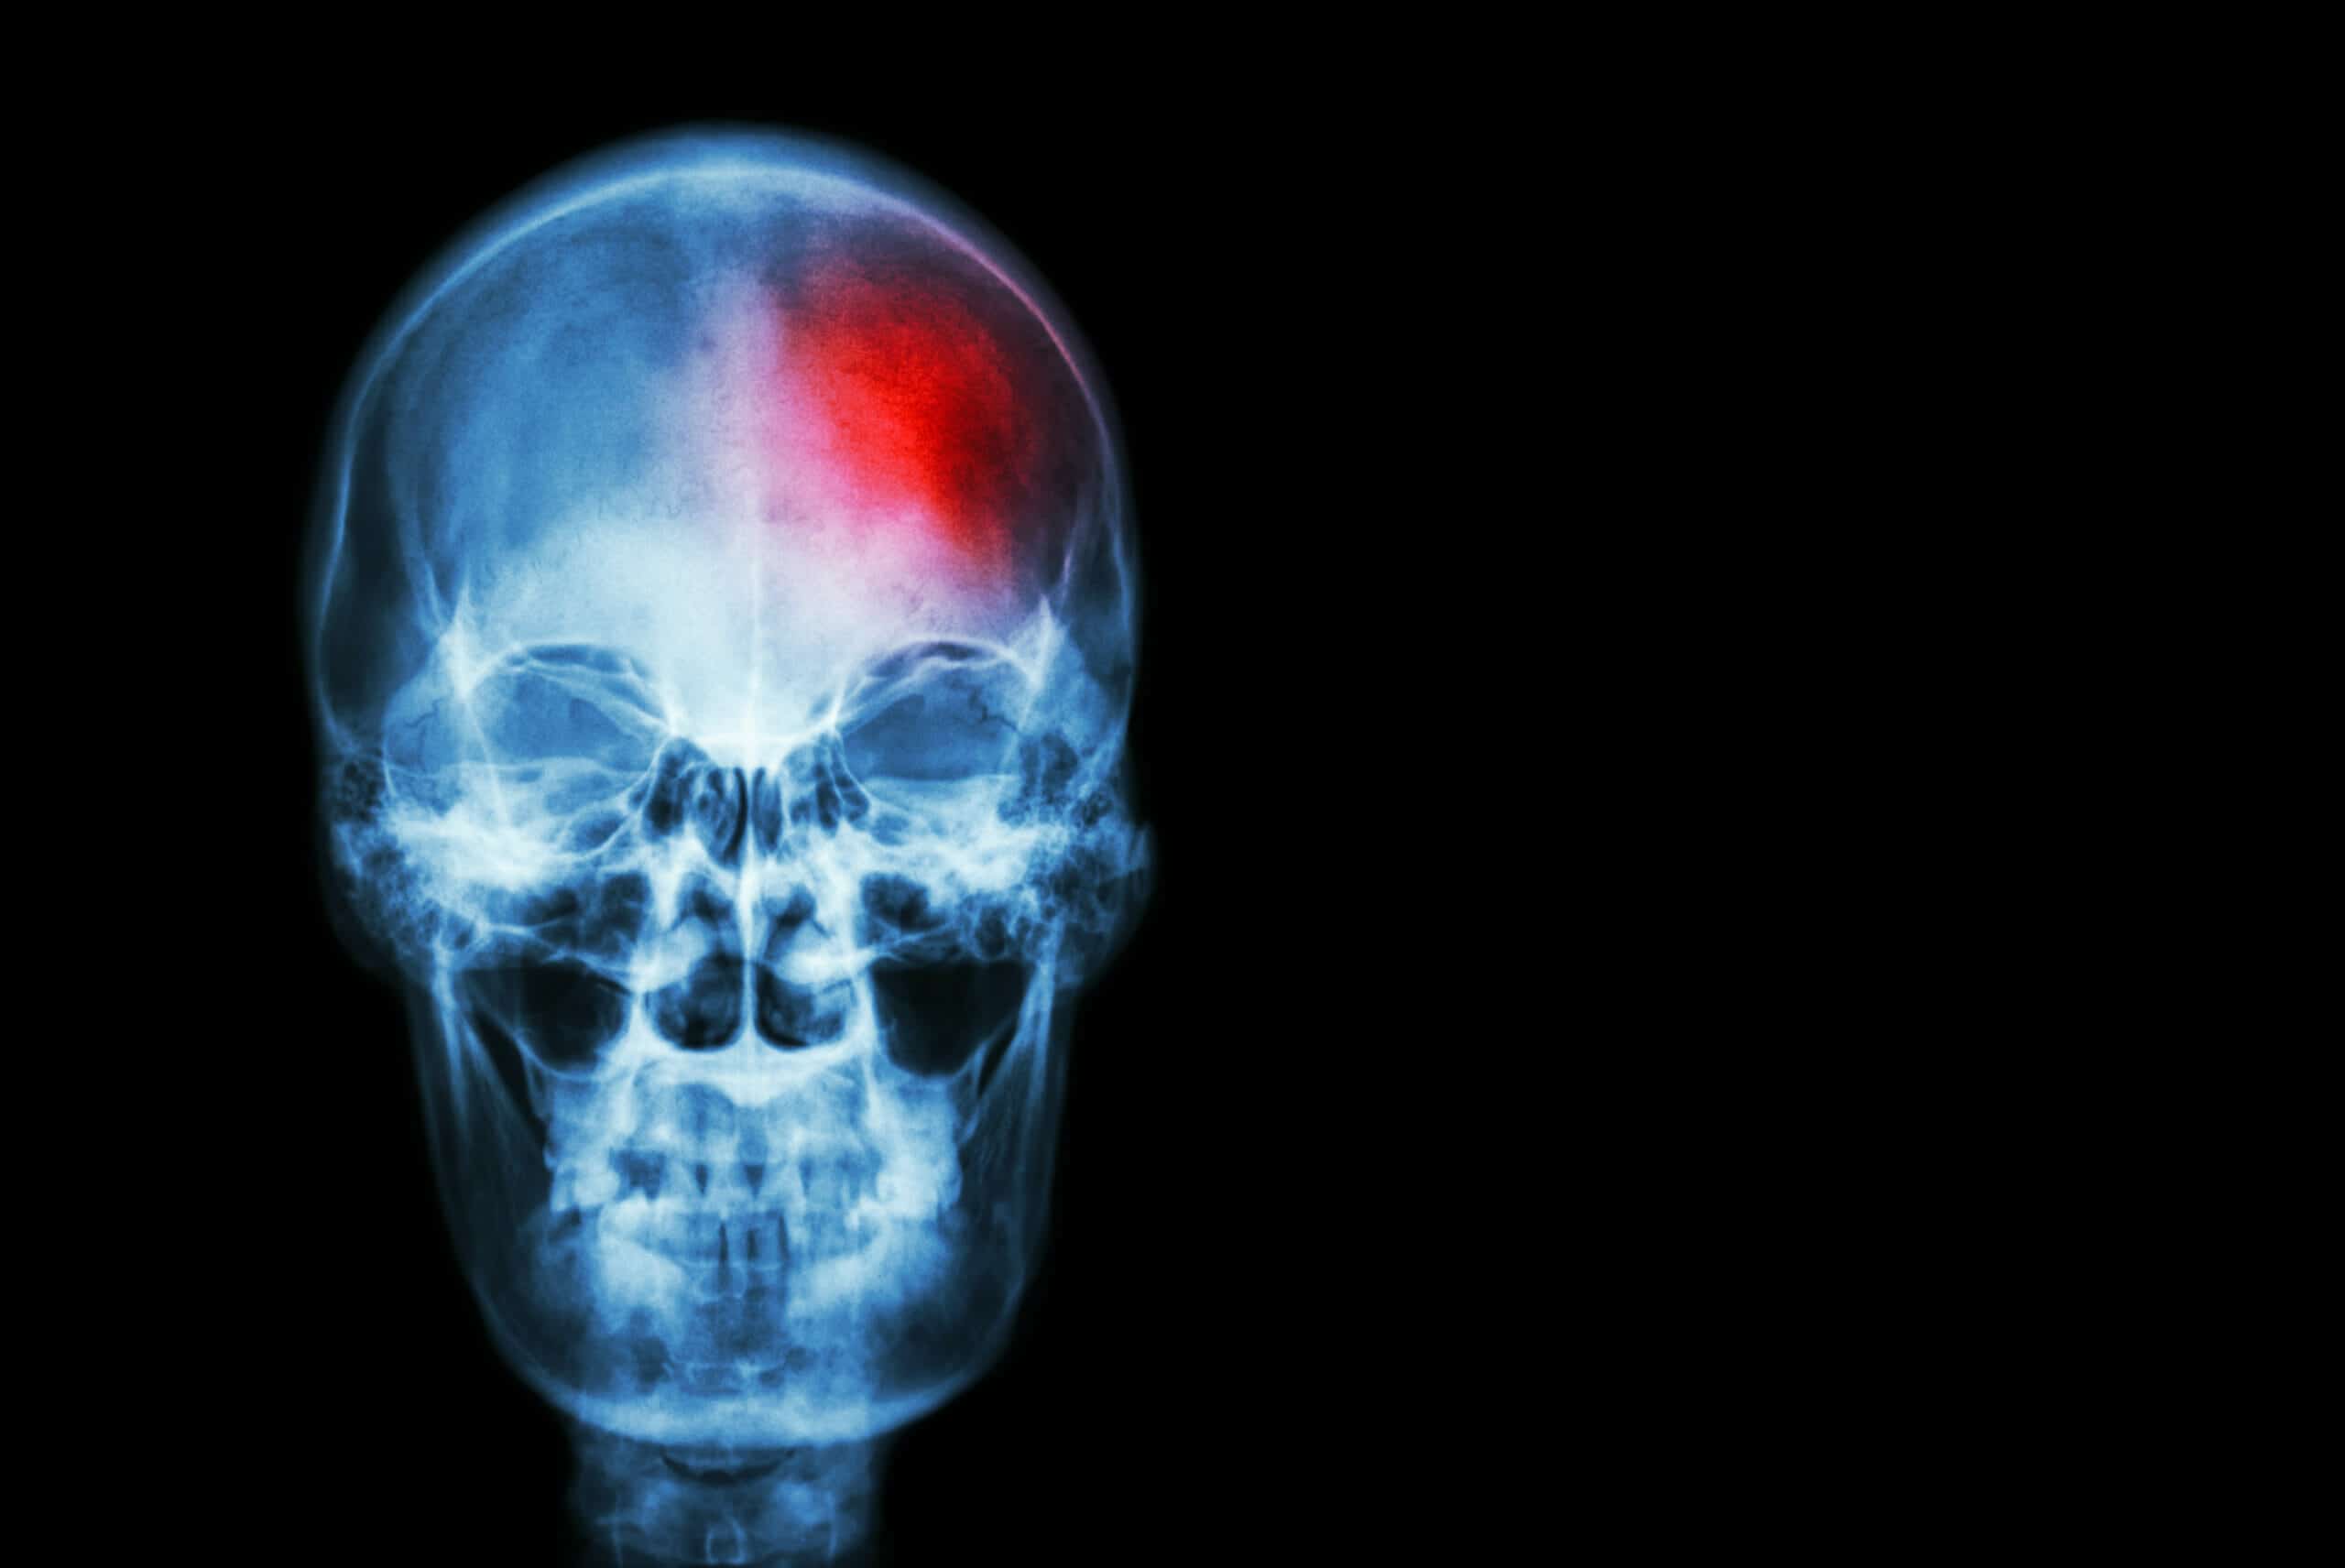 What are the symptoms of a traumatic brain injury - Chelsie King Garza